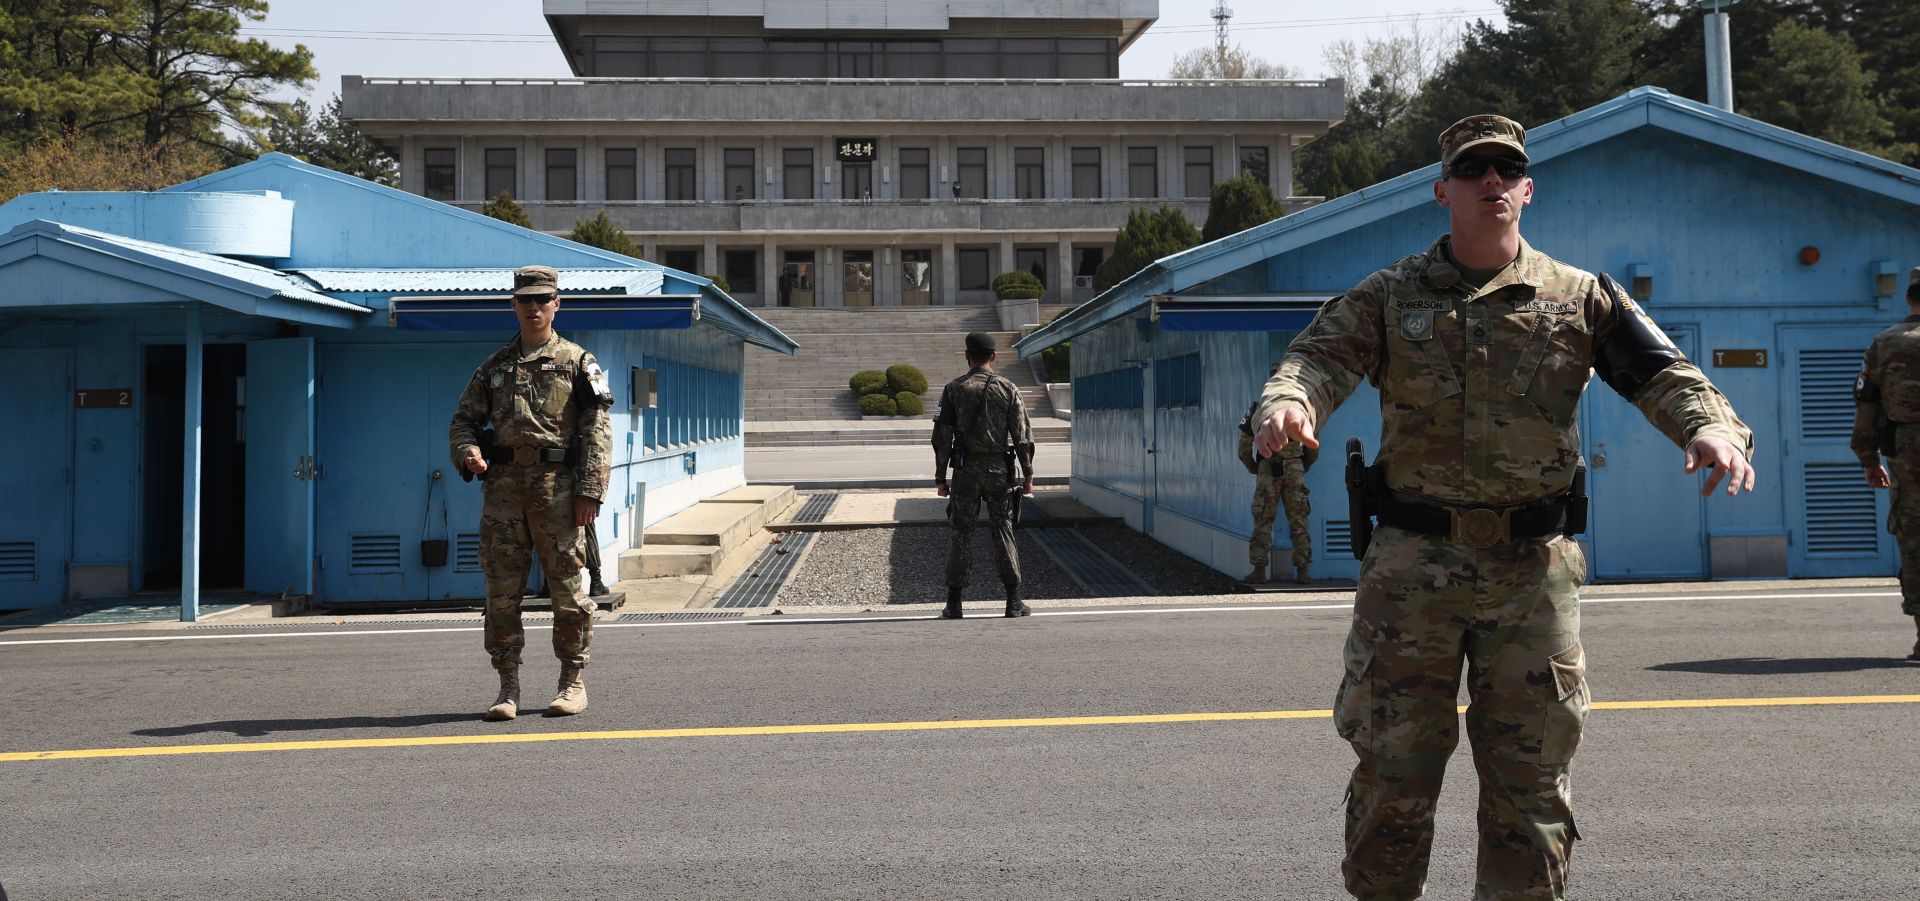 epa07096378 (FILE) - South Korean soldiers standing guard at the Joint Security Area (JSA) on the Demilitarized Zone (DMZ) in the border village of Panmunjom in Paju, South Korea, 18 April 2018 (reissued 16 October 2018). The two Koreas and the United Nations Command (UNC) will launch trilateral consultations on 16 October on disarming the Joint Security Area (JSA) in the heavily fortified border area, Seoul's defense ministry announced. South and North Korea agreed to turn the JSA into a weapon-free zone under the military agreement signed by their defense chiefs during the Pyongyang summit in September between President Moon Jae-in and North Korean leader Kim Jong-un.  EPA/JEON HEON-KYUN